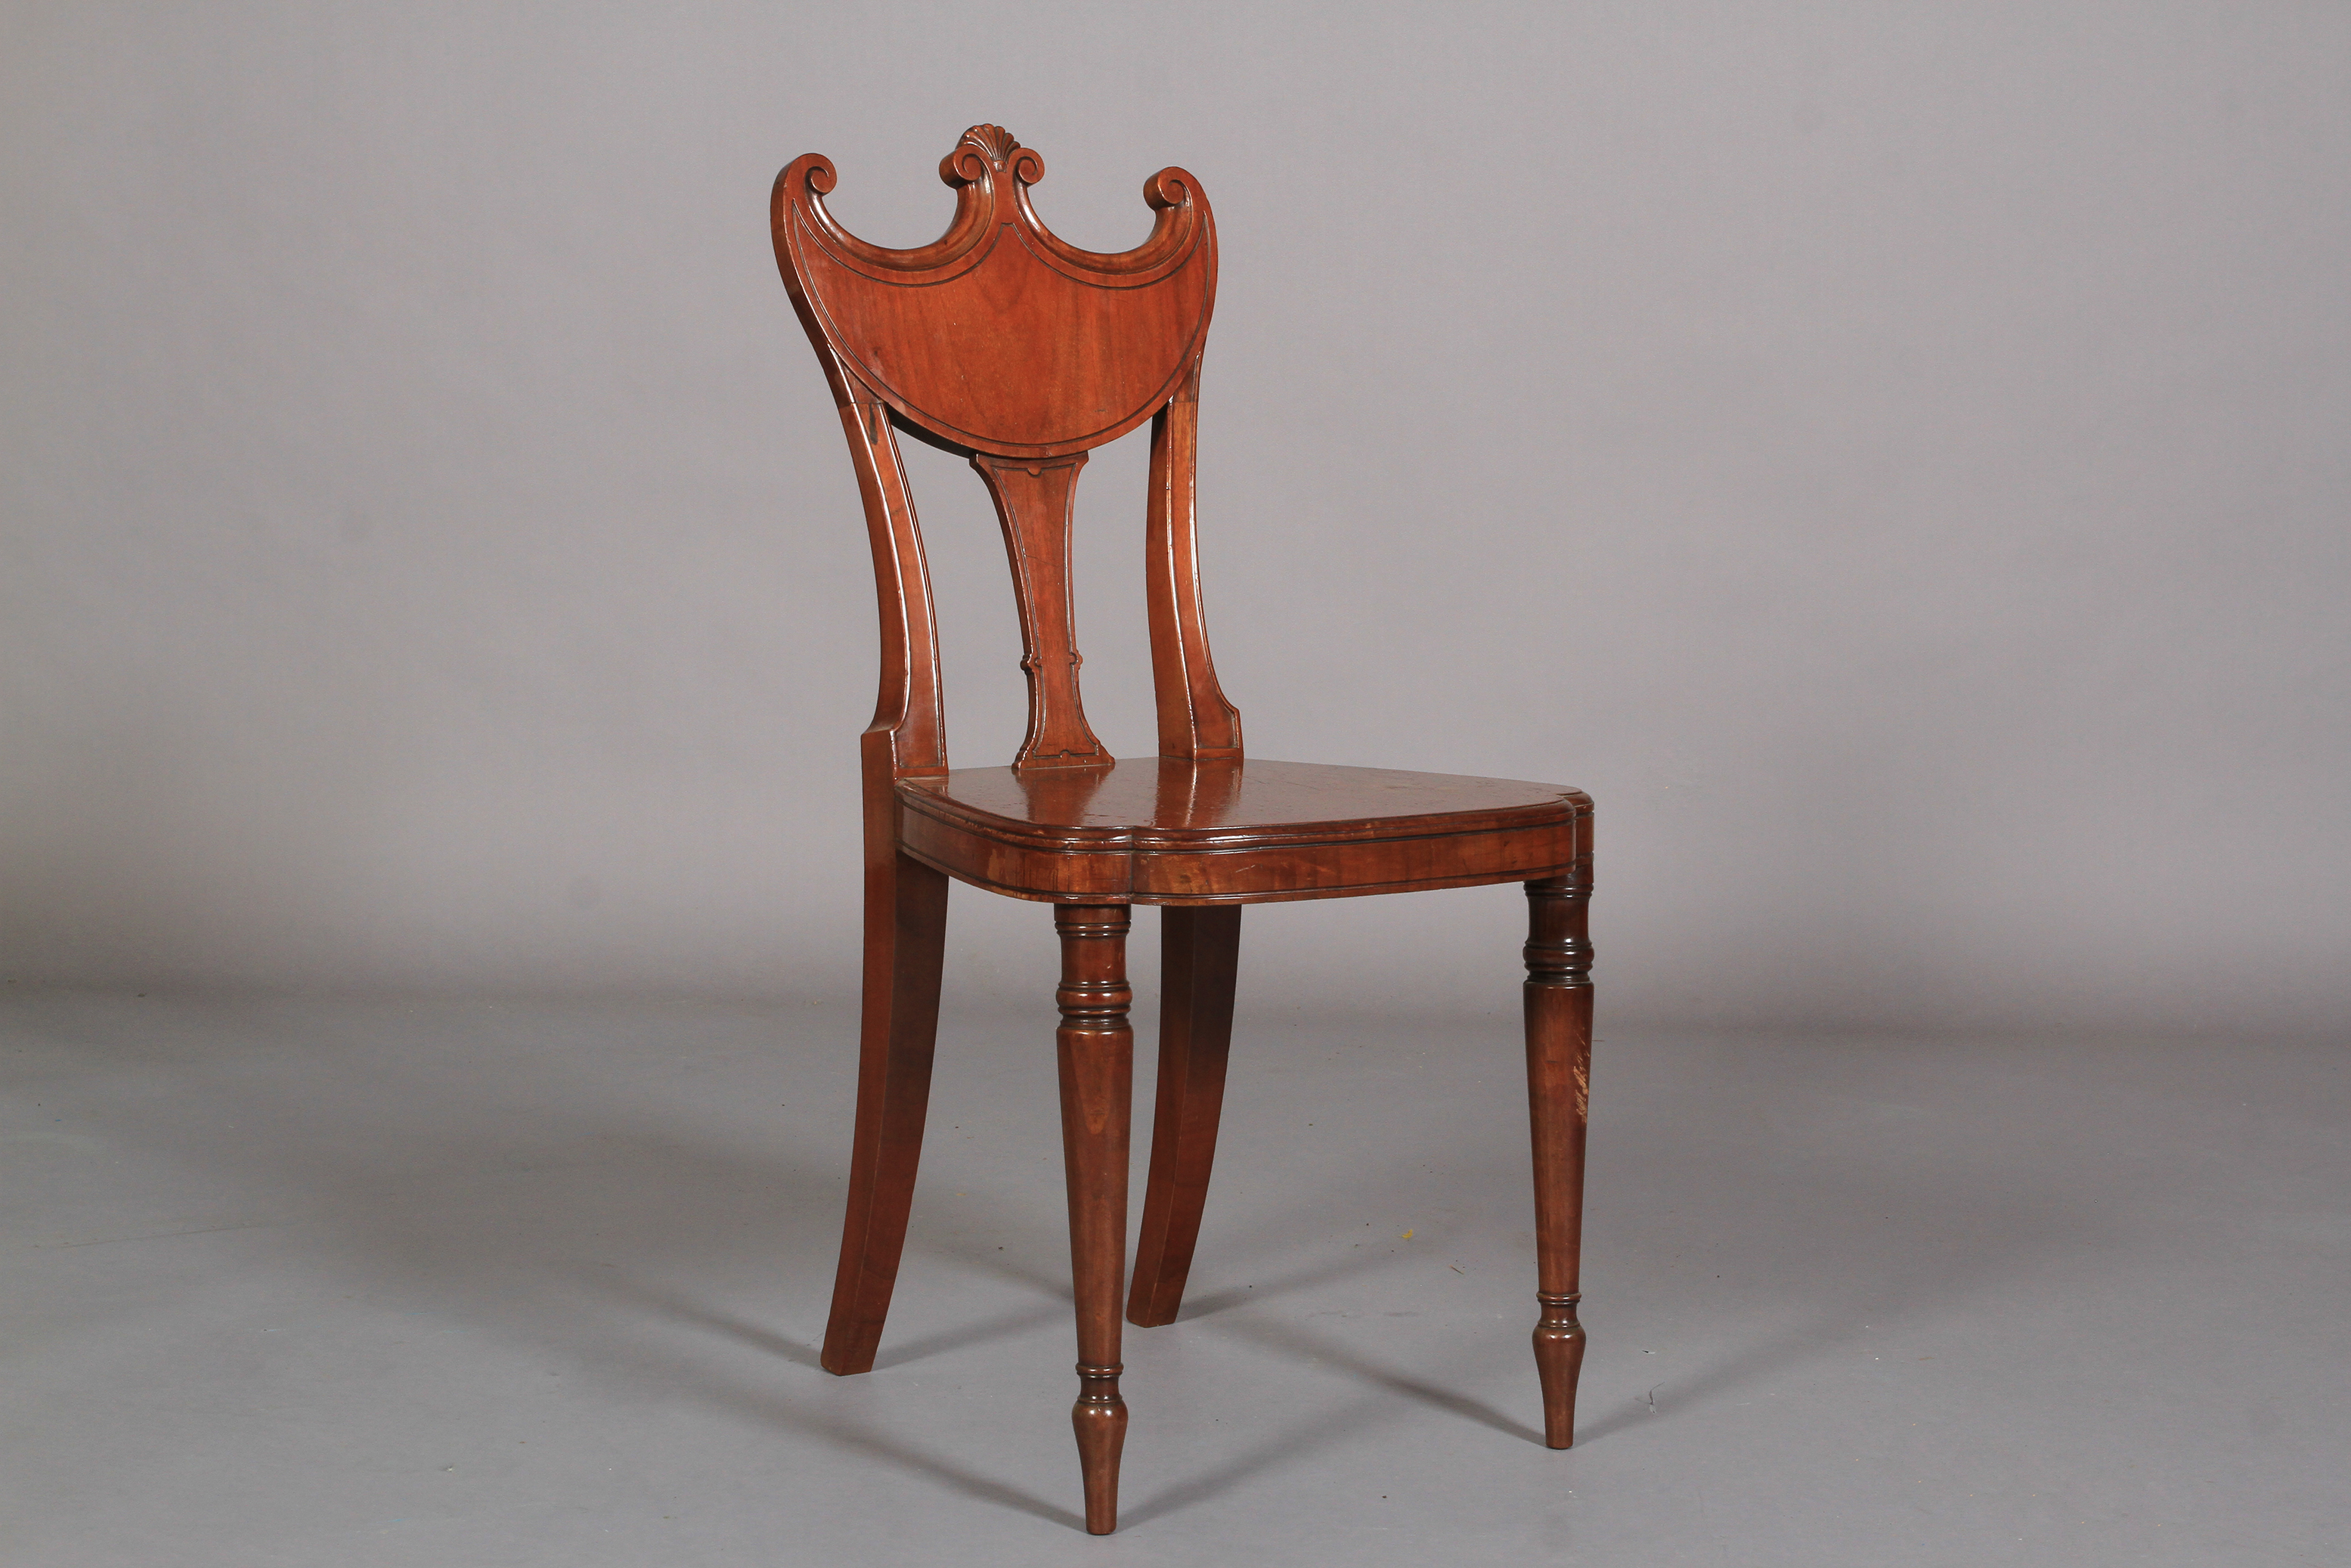 A GEORGE IV MAHOGANY HALL CHAIR with swag and splat back, on slender turned legs